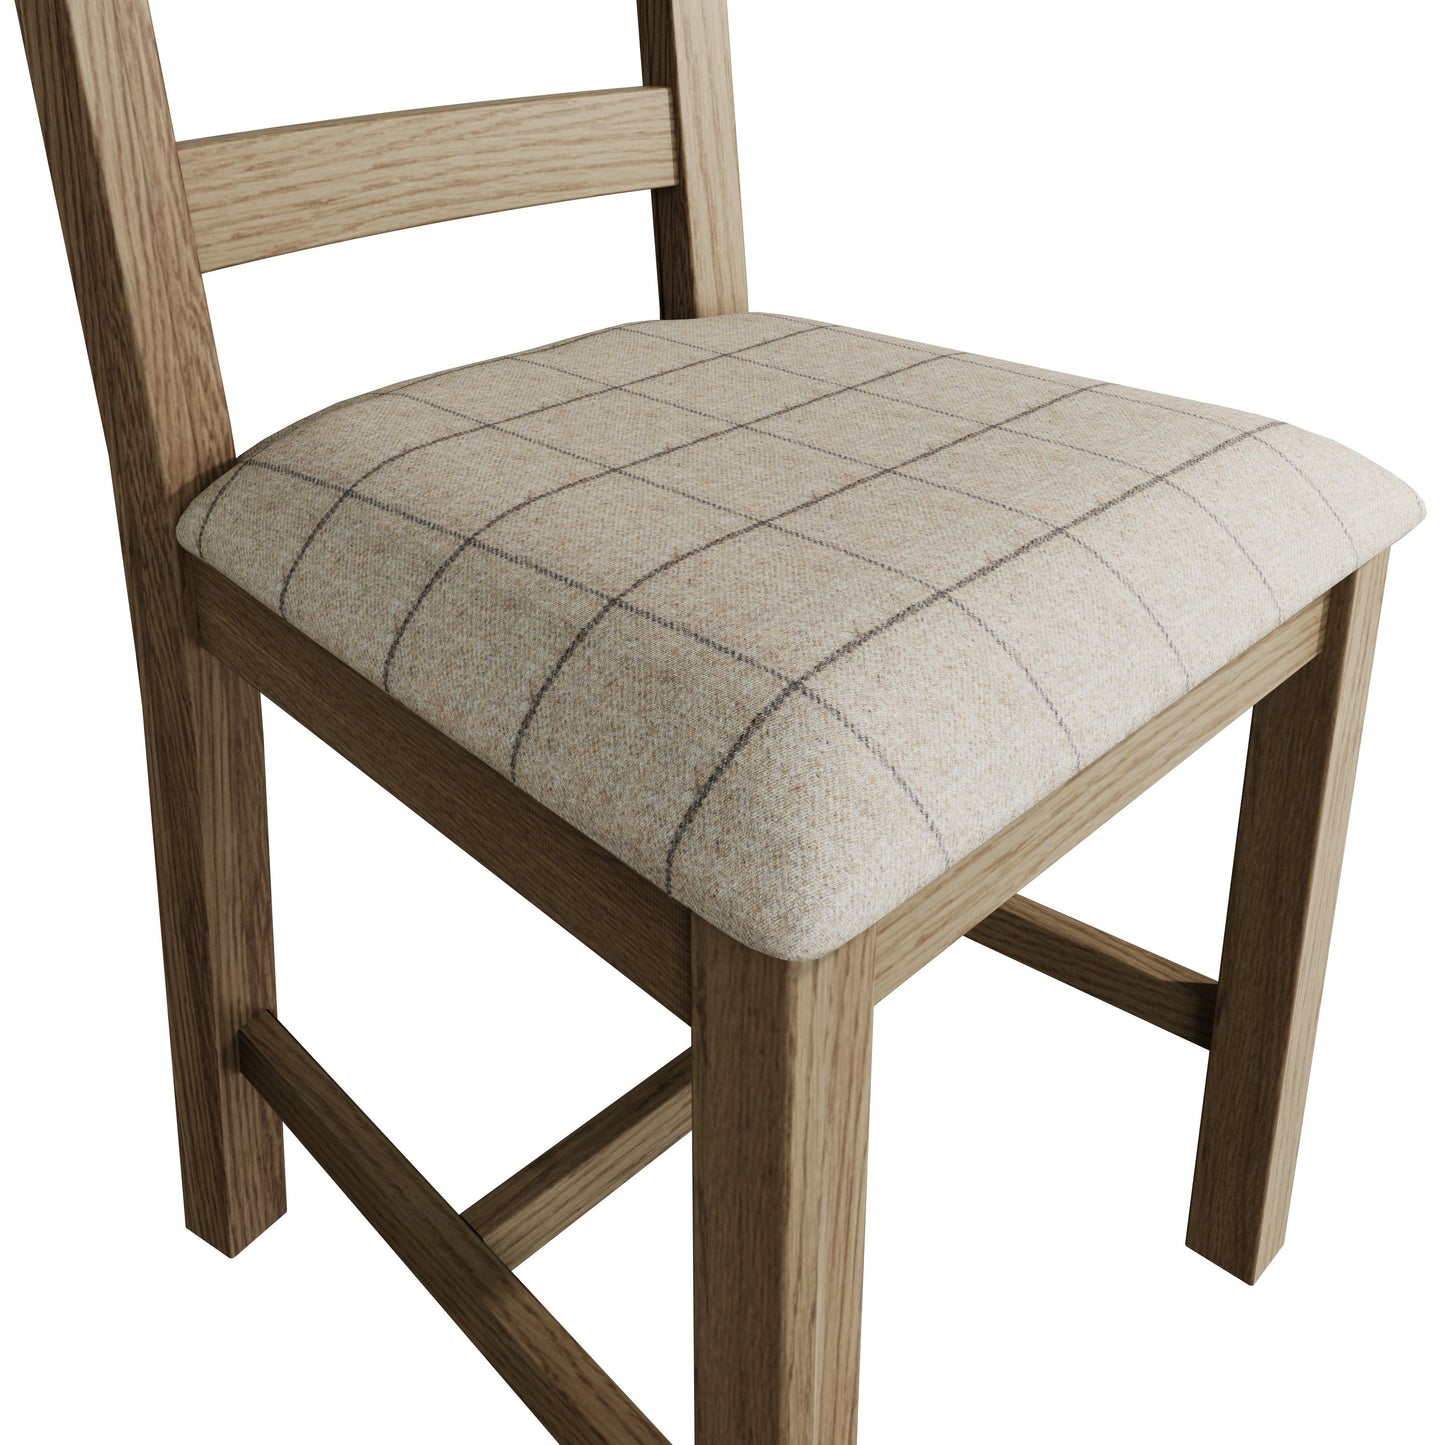 Horner Slat Back Fabric Seat Dining Chair